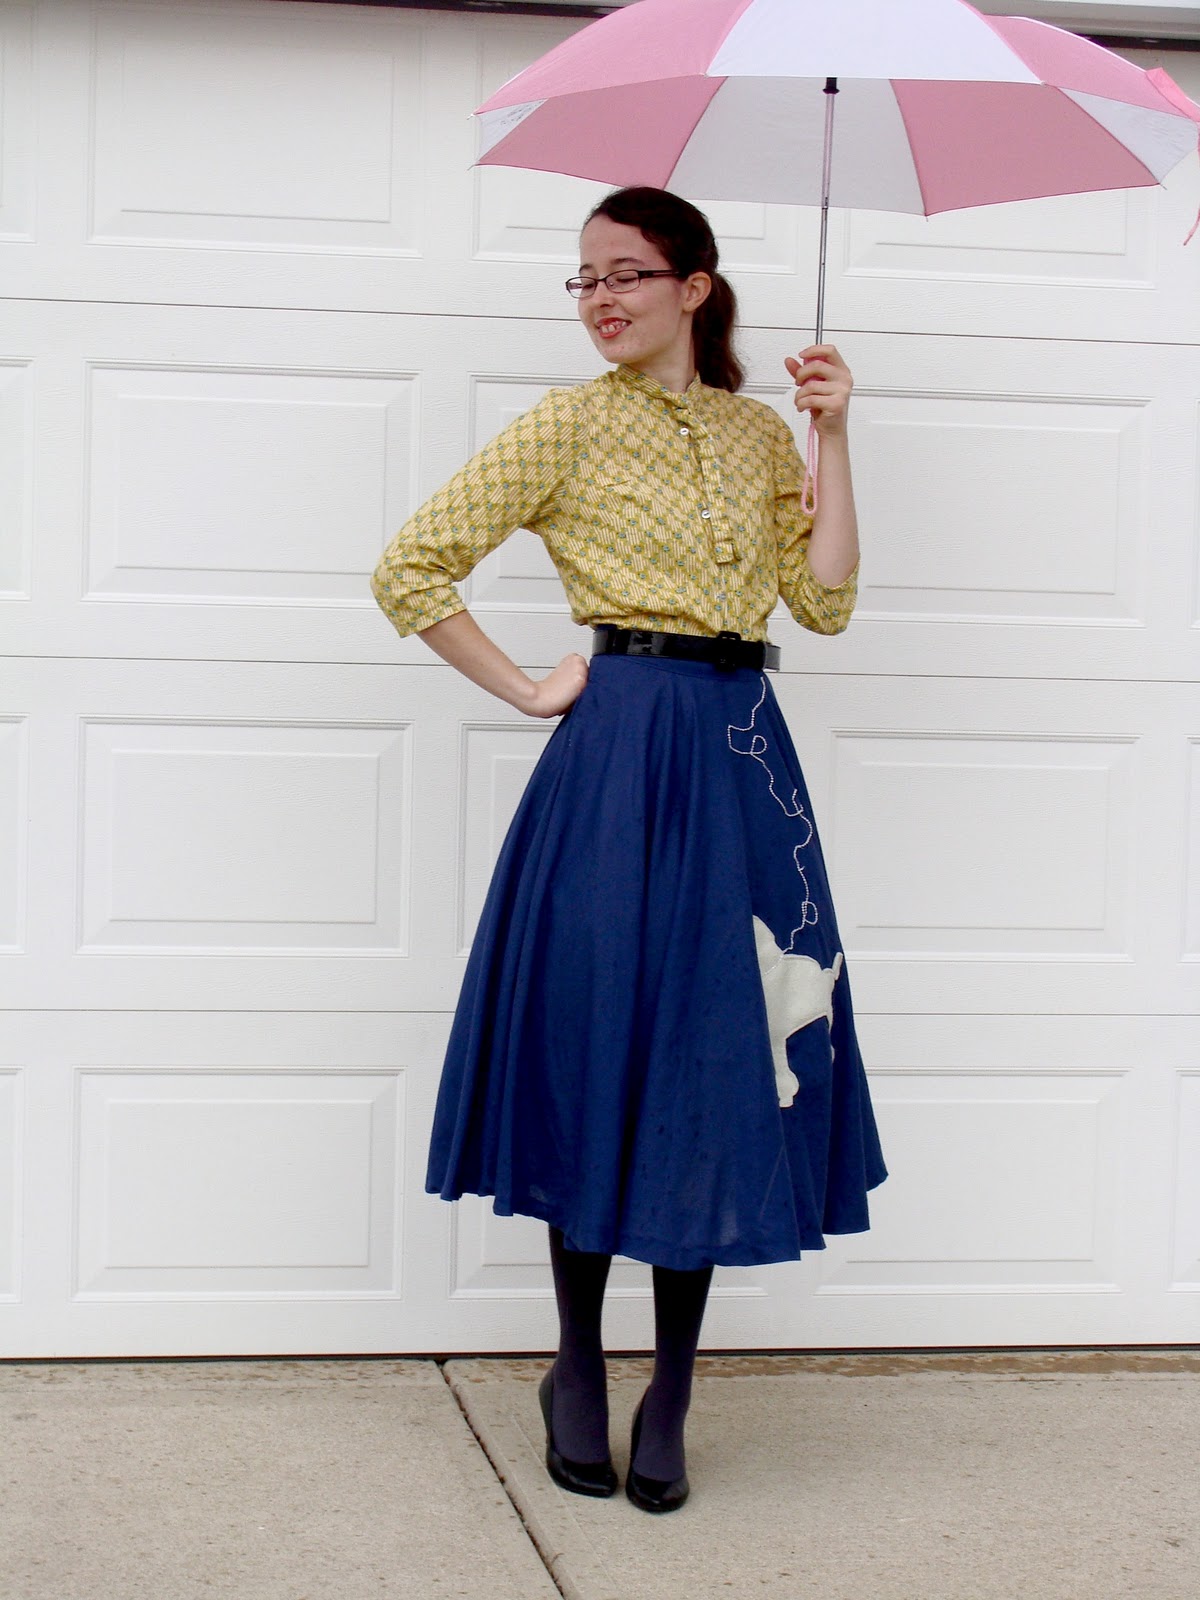 images of fashion modest blog what i wore 1950s poodle skirt wallpaper